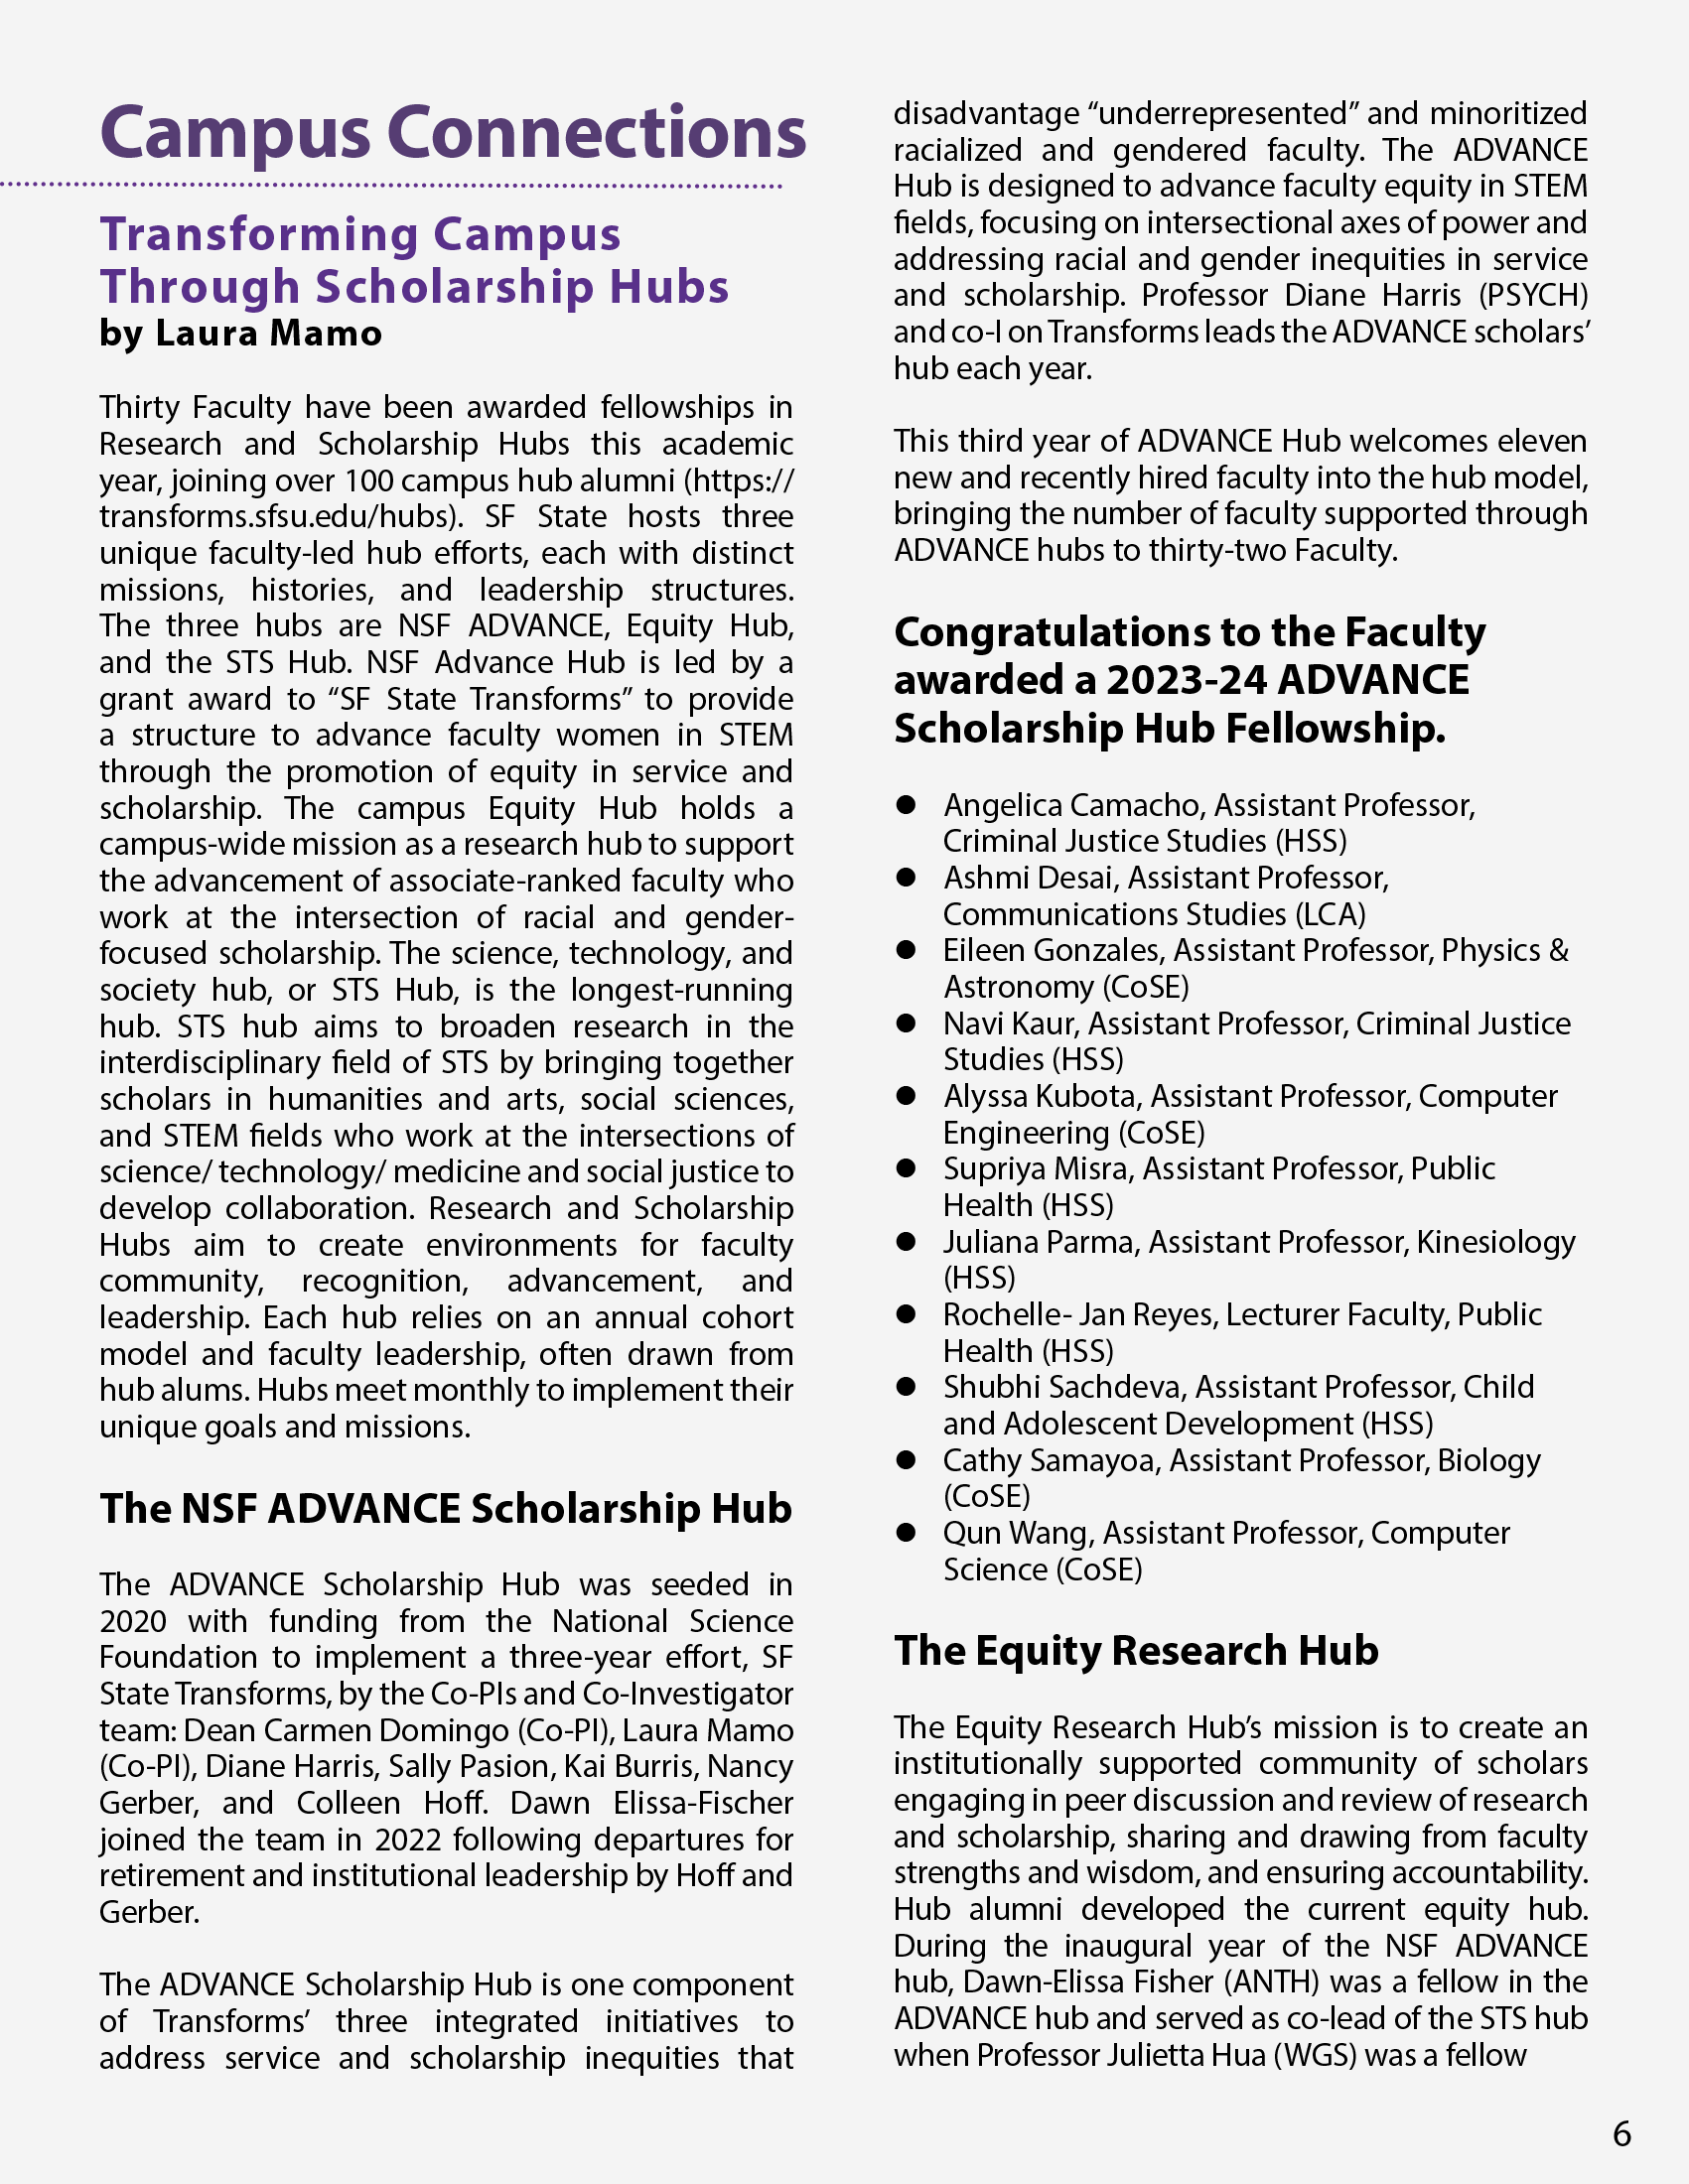 The sixth page of the Fall 2023 newsletter.